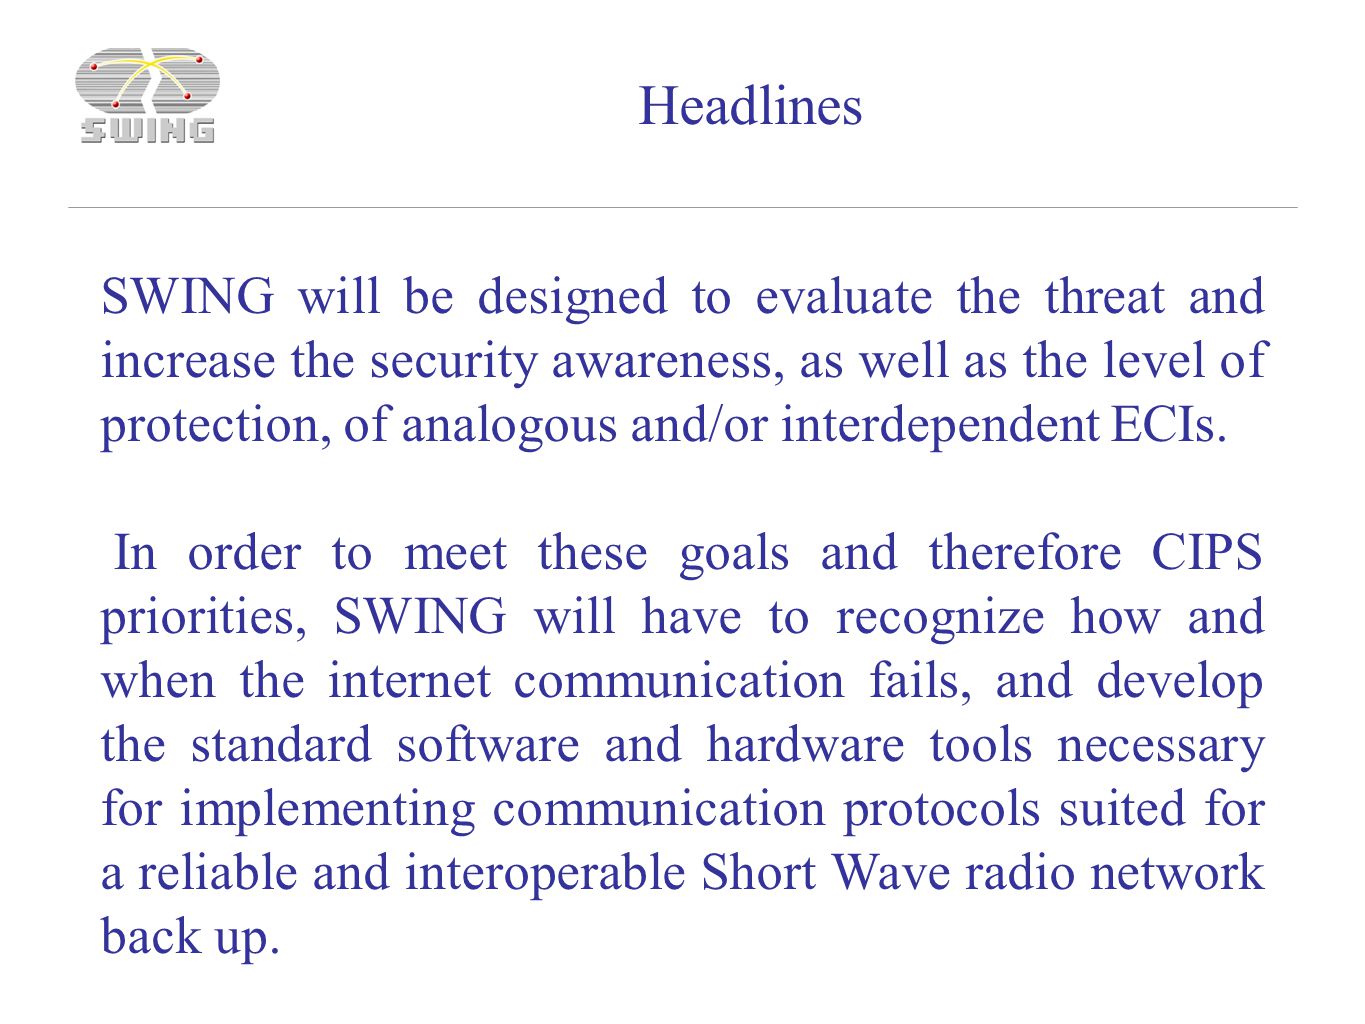 SWING will be designed to evaluate the threat and increase the security awareness, as well as the level of protection, of analogous and/or interdependent ECIs.